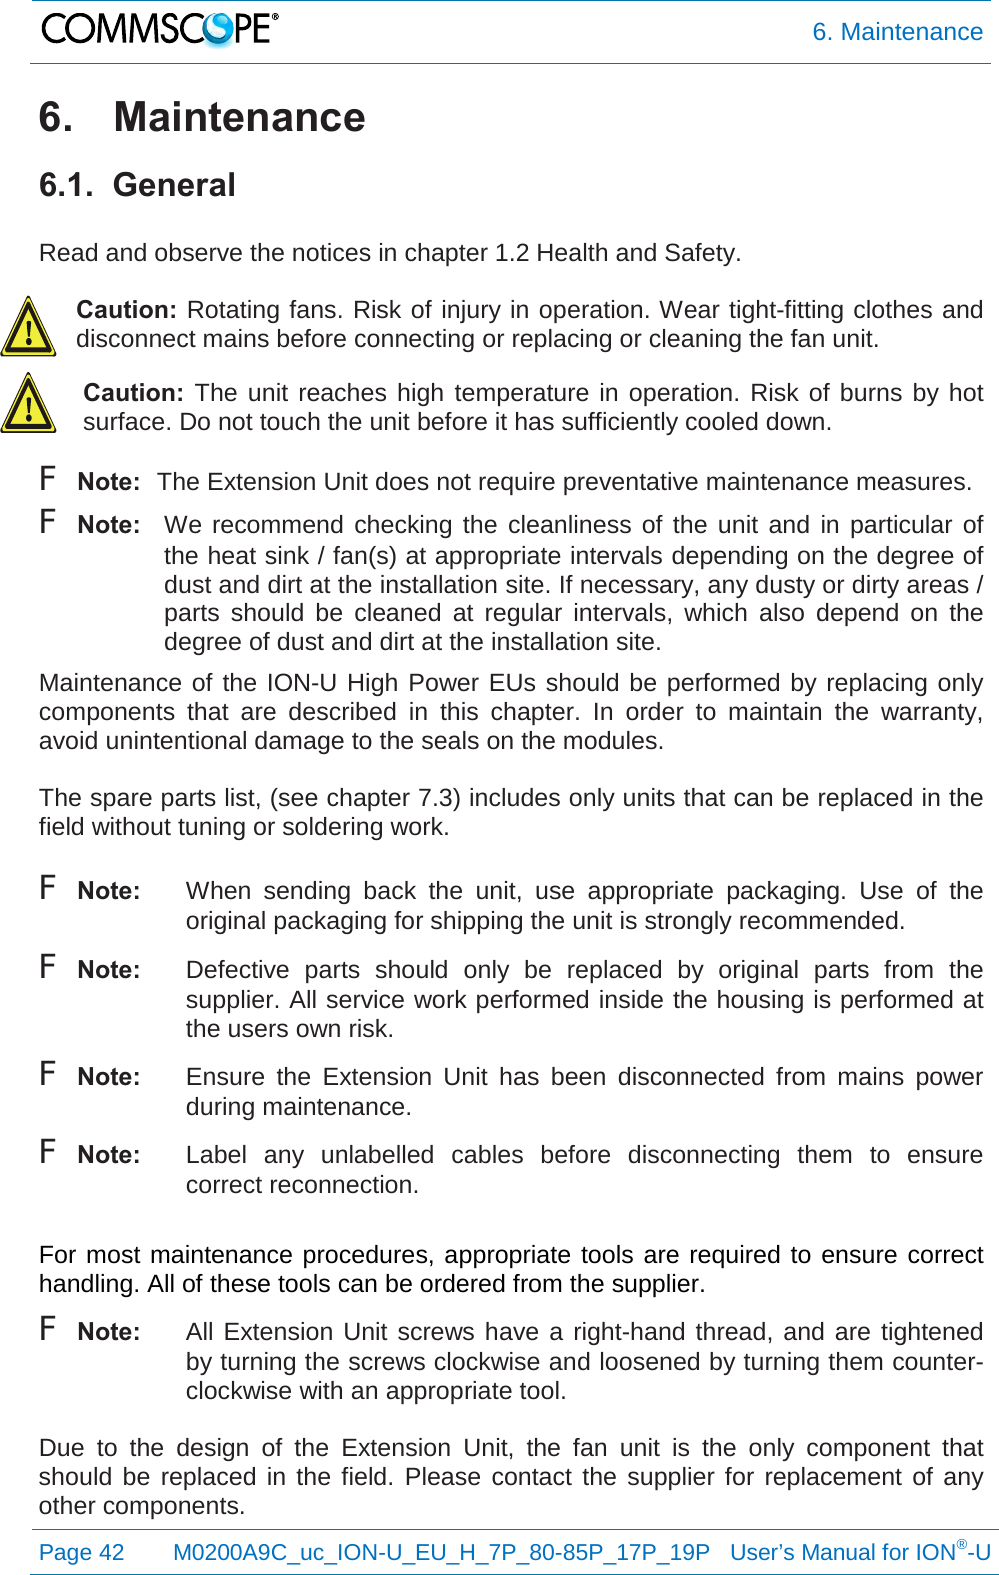  6. Maintenance  Page 42 M0200A9C_uc_ION-U_EU_H_7P_80-85P_17P_19P   User’s Manual for ION®-U  6. Maintenance 6.1.  General  Read and observe the notices in chapter 1.2 Health and Safety.  Caution: Rotating fans. Risk of injury in operation. Wear tight-fitting clothes and disconnect mains before connecting or replacing or cleaning the fan unit. Caution:  The unit reaches high temperature in operation. Risk of burns by hot surface. Do not touch the unit before it has sufficiently cooled down. F Note: The Extension Unit does not require preventative maintenance measures. F Note: We recommend checking the cleanliness of the unit and in particular of the heat sink / fan(s) at appropriate intervals depending on the degree of dust and dirt at the installation site. If necessary, any dusty or dirty areas / parts should be cleaned at regular intervals, which also depend on the degree of dust and dirt at the installation site. Maintenance of the ION-U High Power EUs should be performed by replacing only components that are described in this chapter. In order to maintain the  warranty, avoid unintentional damage to the seals on the modules.  The spare parts list, (see chapter 7.3) includes only units that can be replaced in the field without tuning or soldering work.  F Note: When sending back the unit, use appropriate packaging.  Use of the original packaging for shipping the unit is strongly recommended. F Note: Defective parts should only be replaced by original parts from the supplier. All service work performed inside the housing is performed at the users own risk. F Note: Ensure the Extension  Unit has been disconnected from mains power during maintenance. F Note: Label any unlabelled cables before disconnecting them to ensure correct reconnection.  For most maintenance procedures, appropriate tools are required to ensure correct handling. All of these tools can be ordered from the supplier.  F Note:  All Extension Unit screws have a right-hand thread, and are tightened by turning the screws clockwise and loosened by turning them counter-clockwise with an appropriate tool.  Due to the design of the Extension  Unit, the fan unit is the only component that should be replaced in the field. Please contact the supplier for replacement of any other components. 